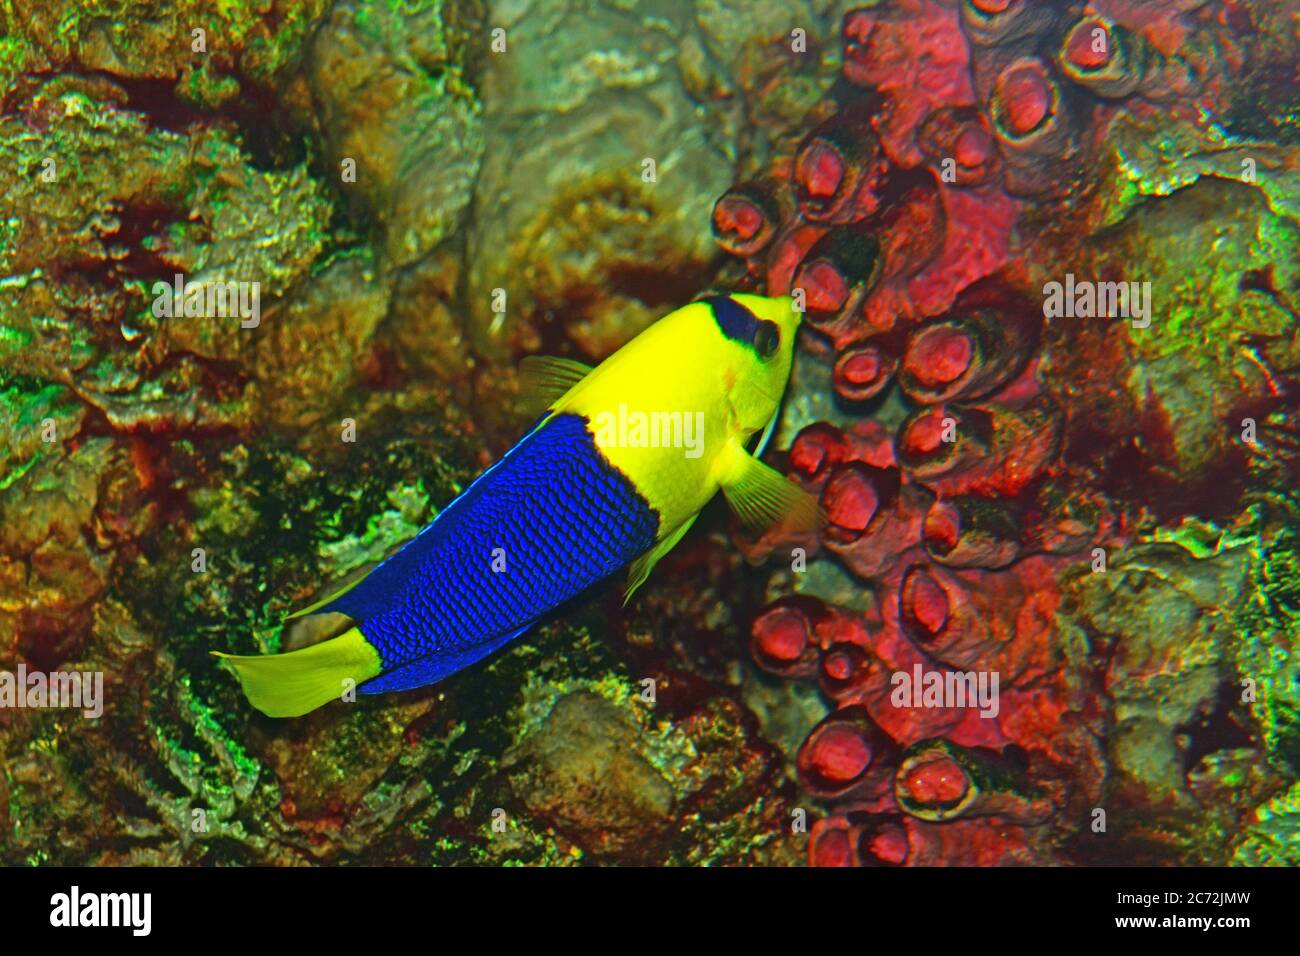 Bicolor Angelfish - close up on Coral reef fish Stock Photo